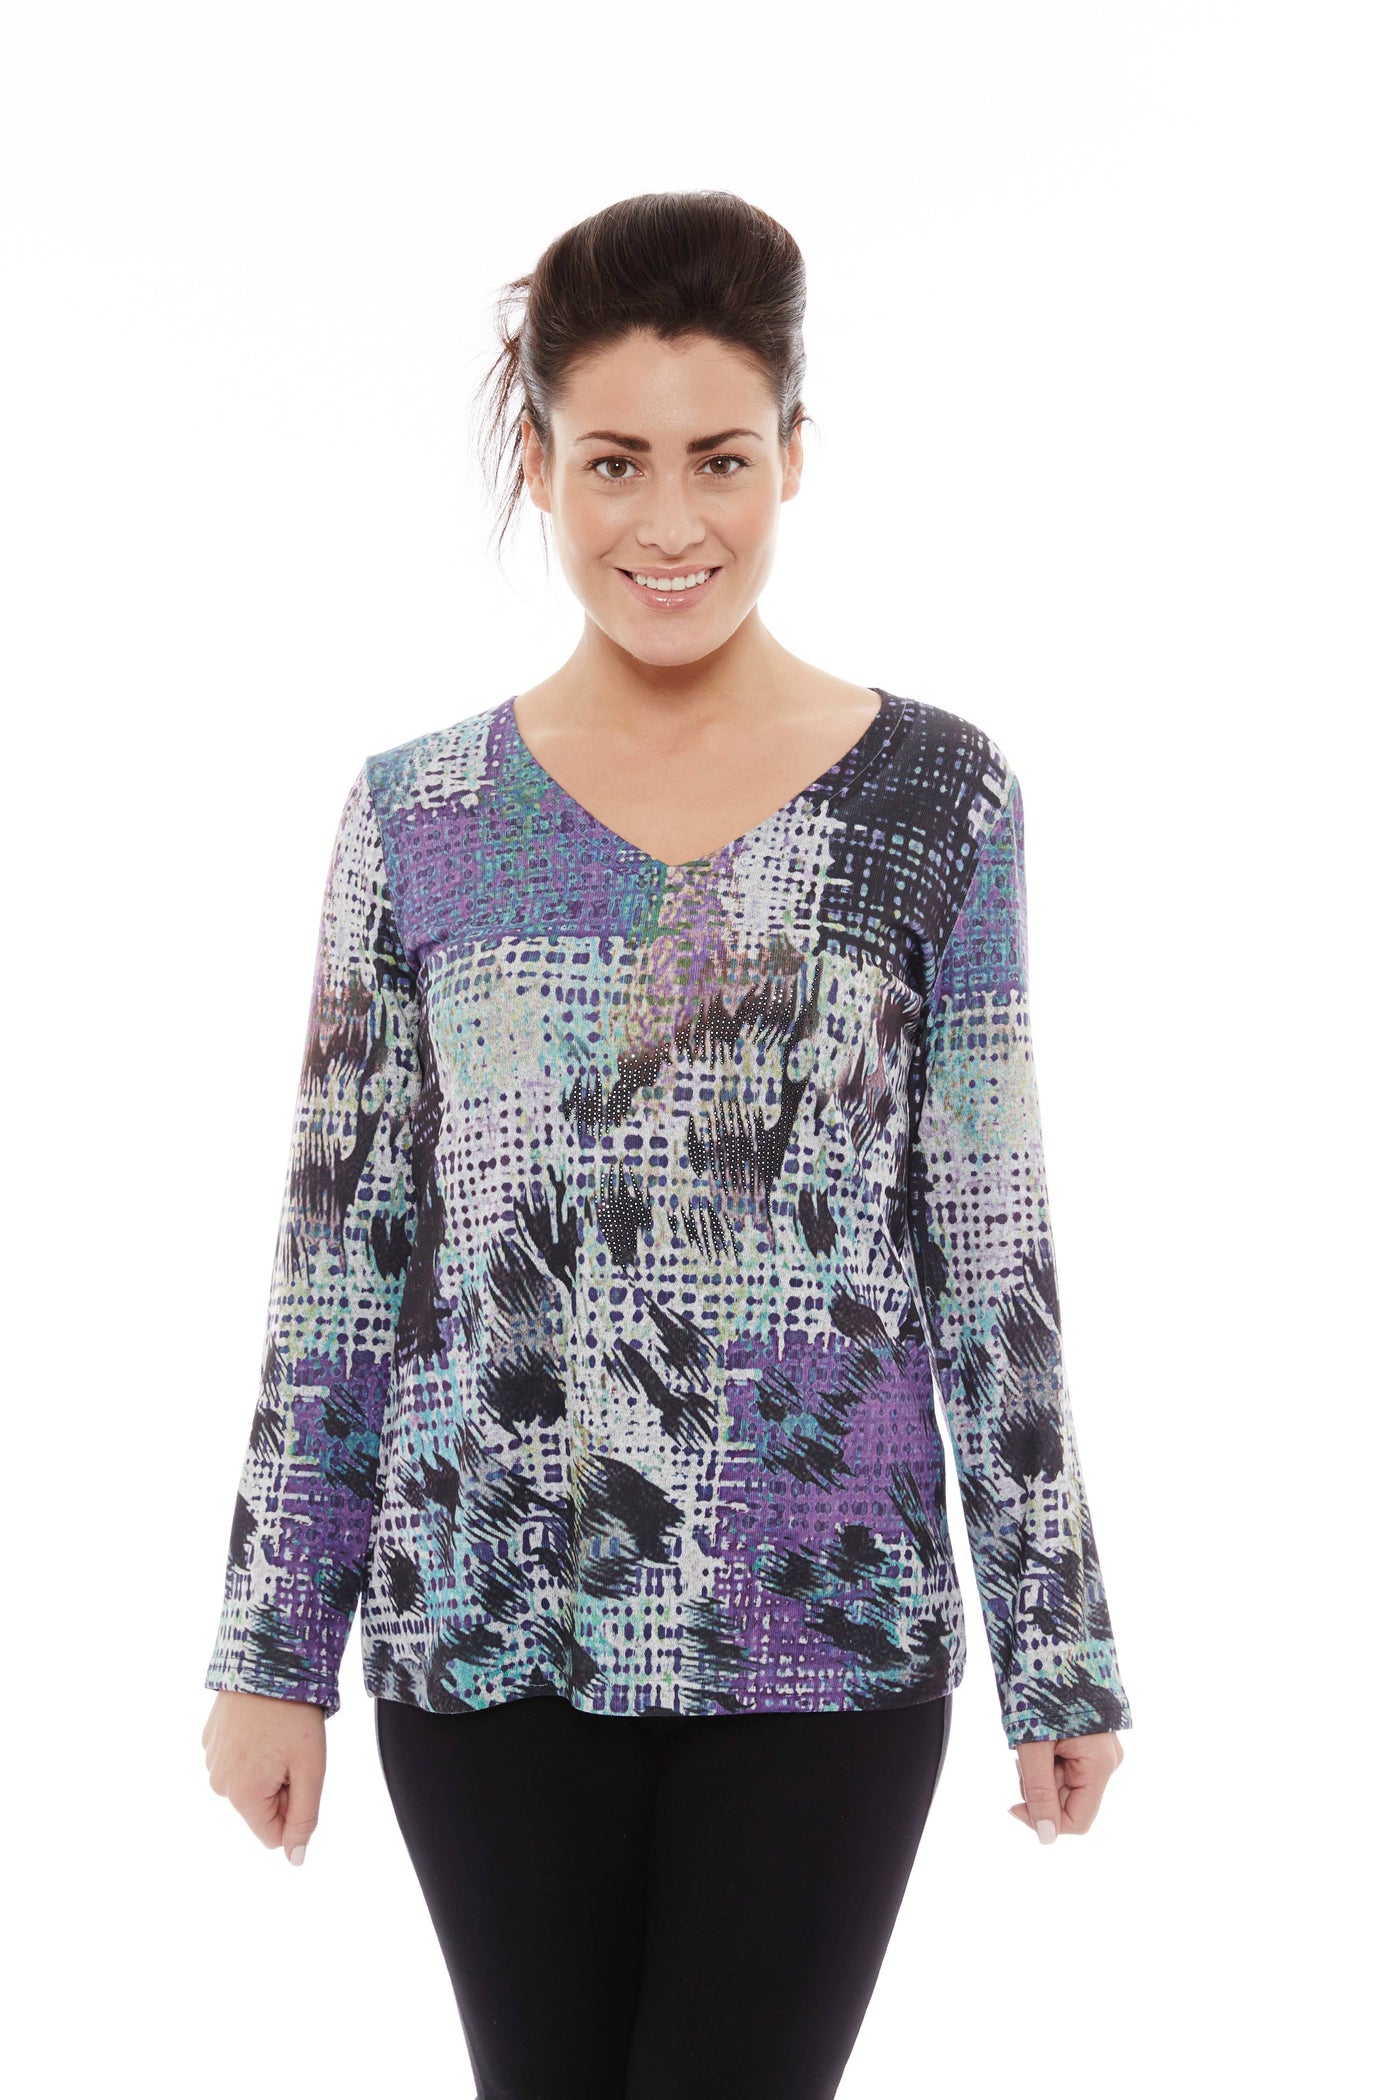 THE WEDNESDAY TOP IN PURPLE PRINTS